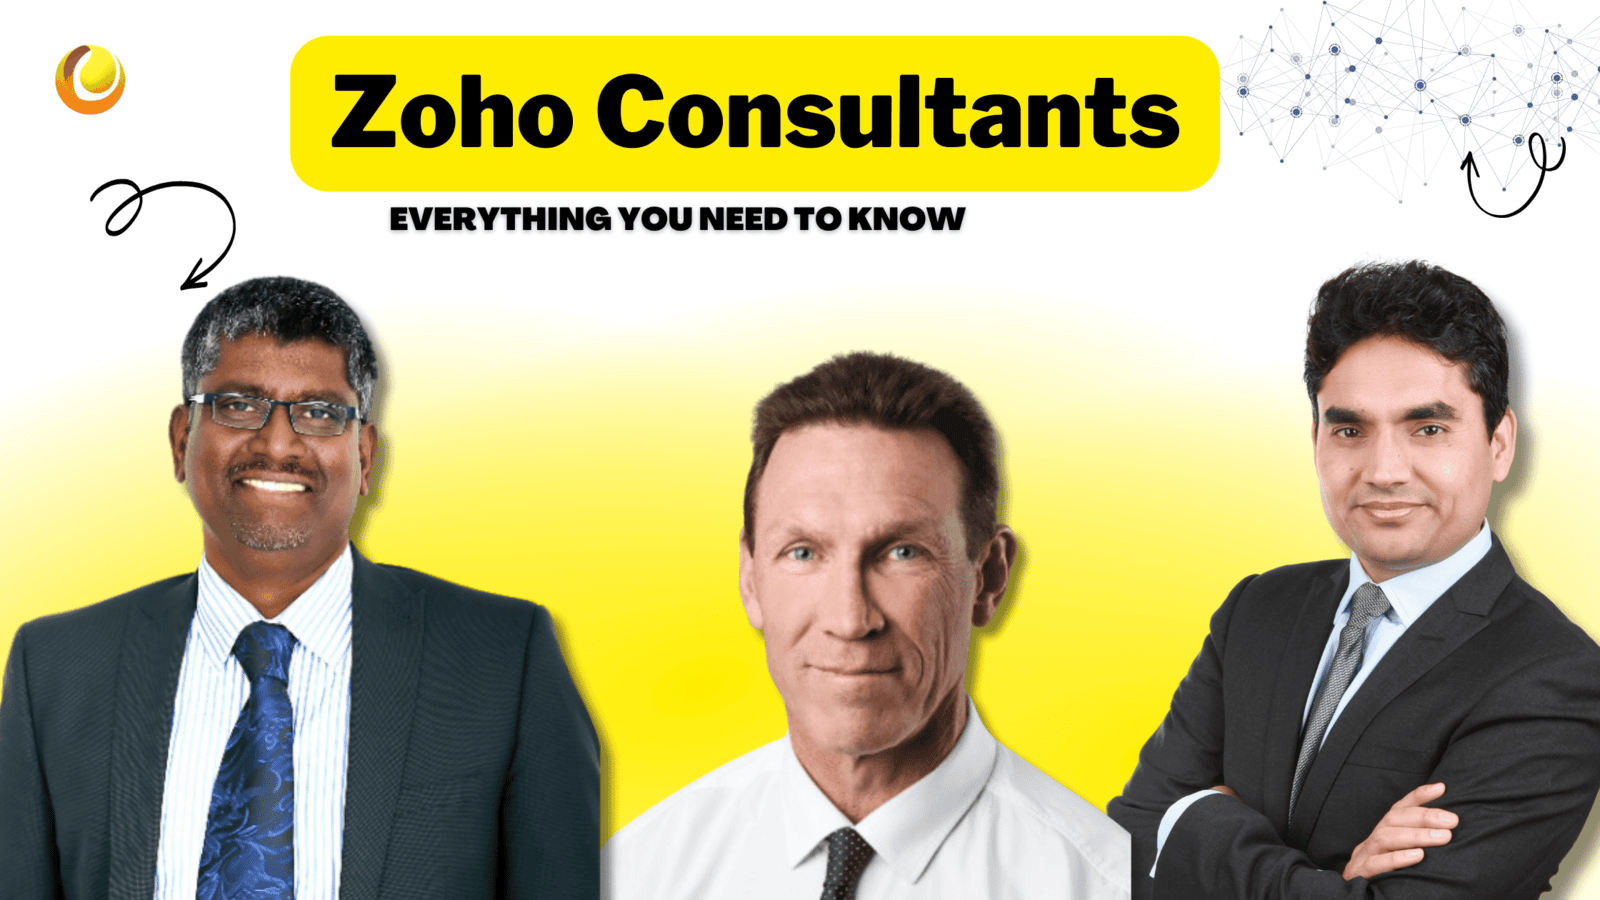 Zoho Consultants: Everything You Need to Know About Them